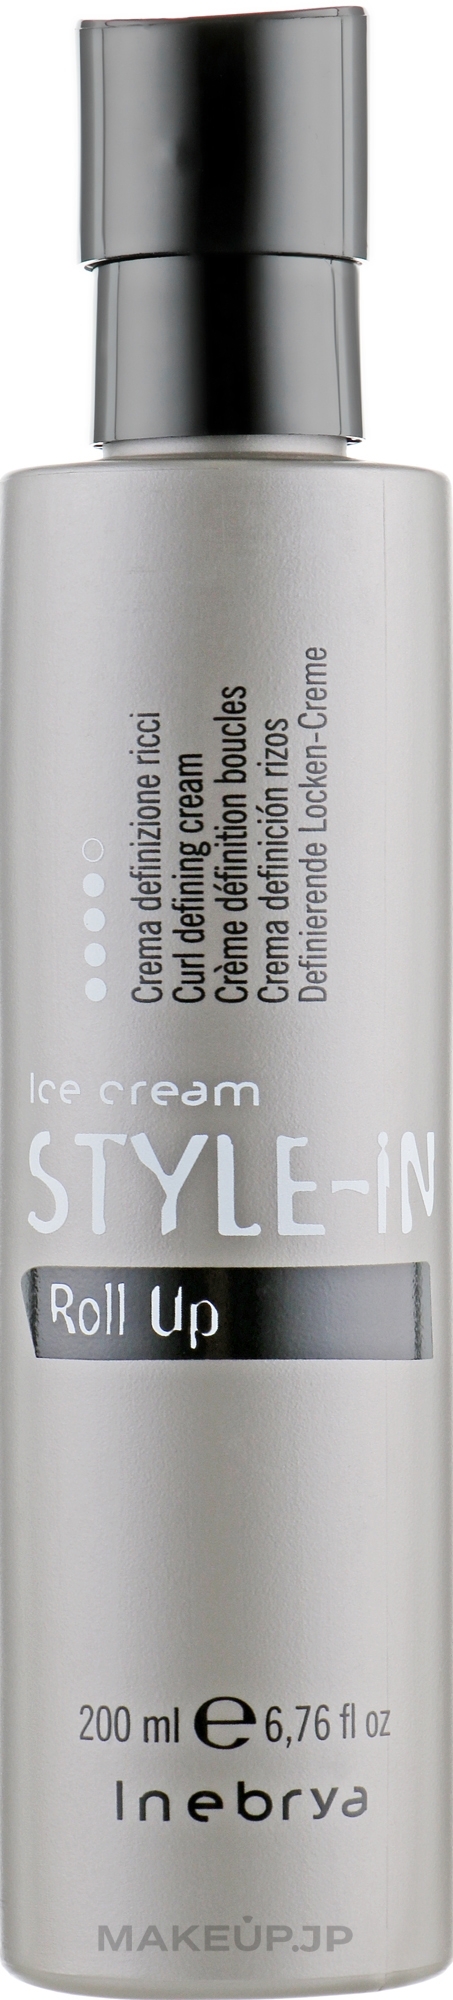 Modeling Cream for Curly Hair - Inebrya Style-In Roll Up — photo 200 ml